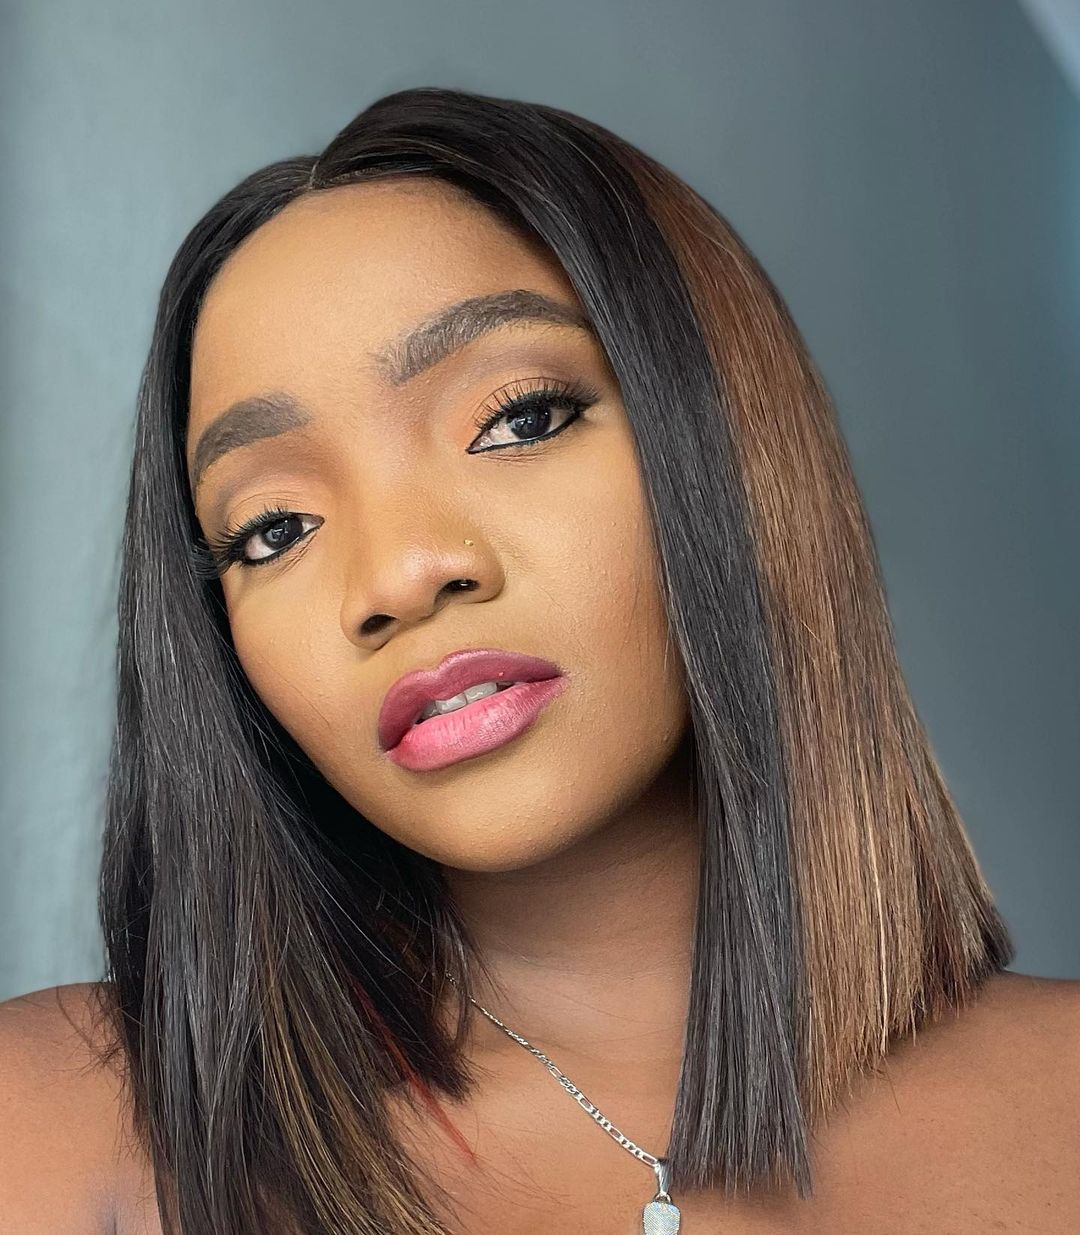 Simi speaks about the challenges of being a woman in the Nigerian music industry